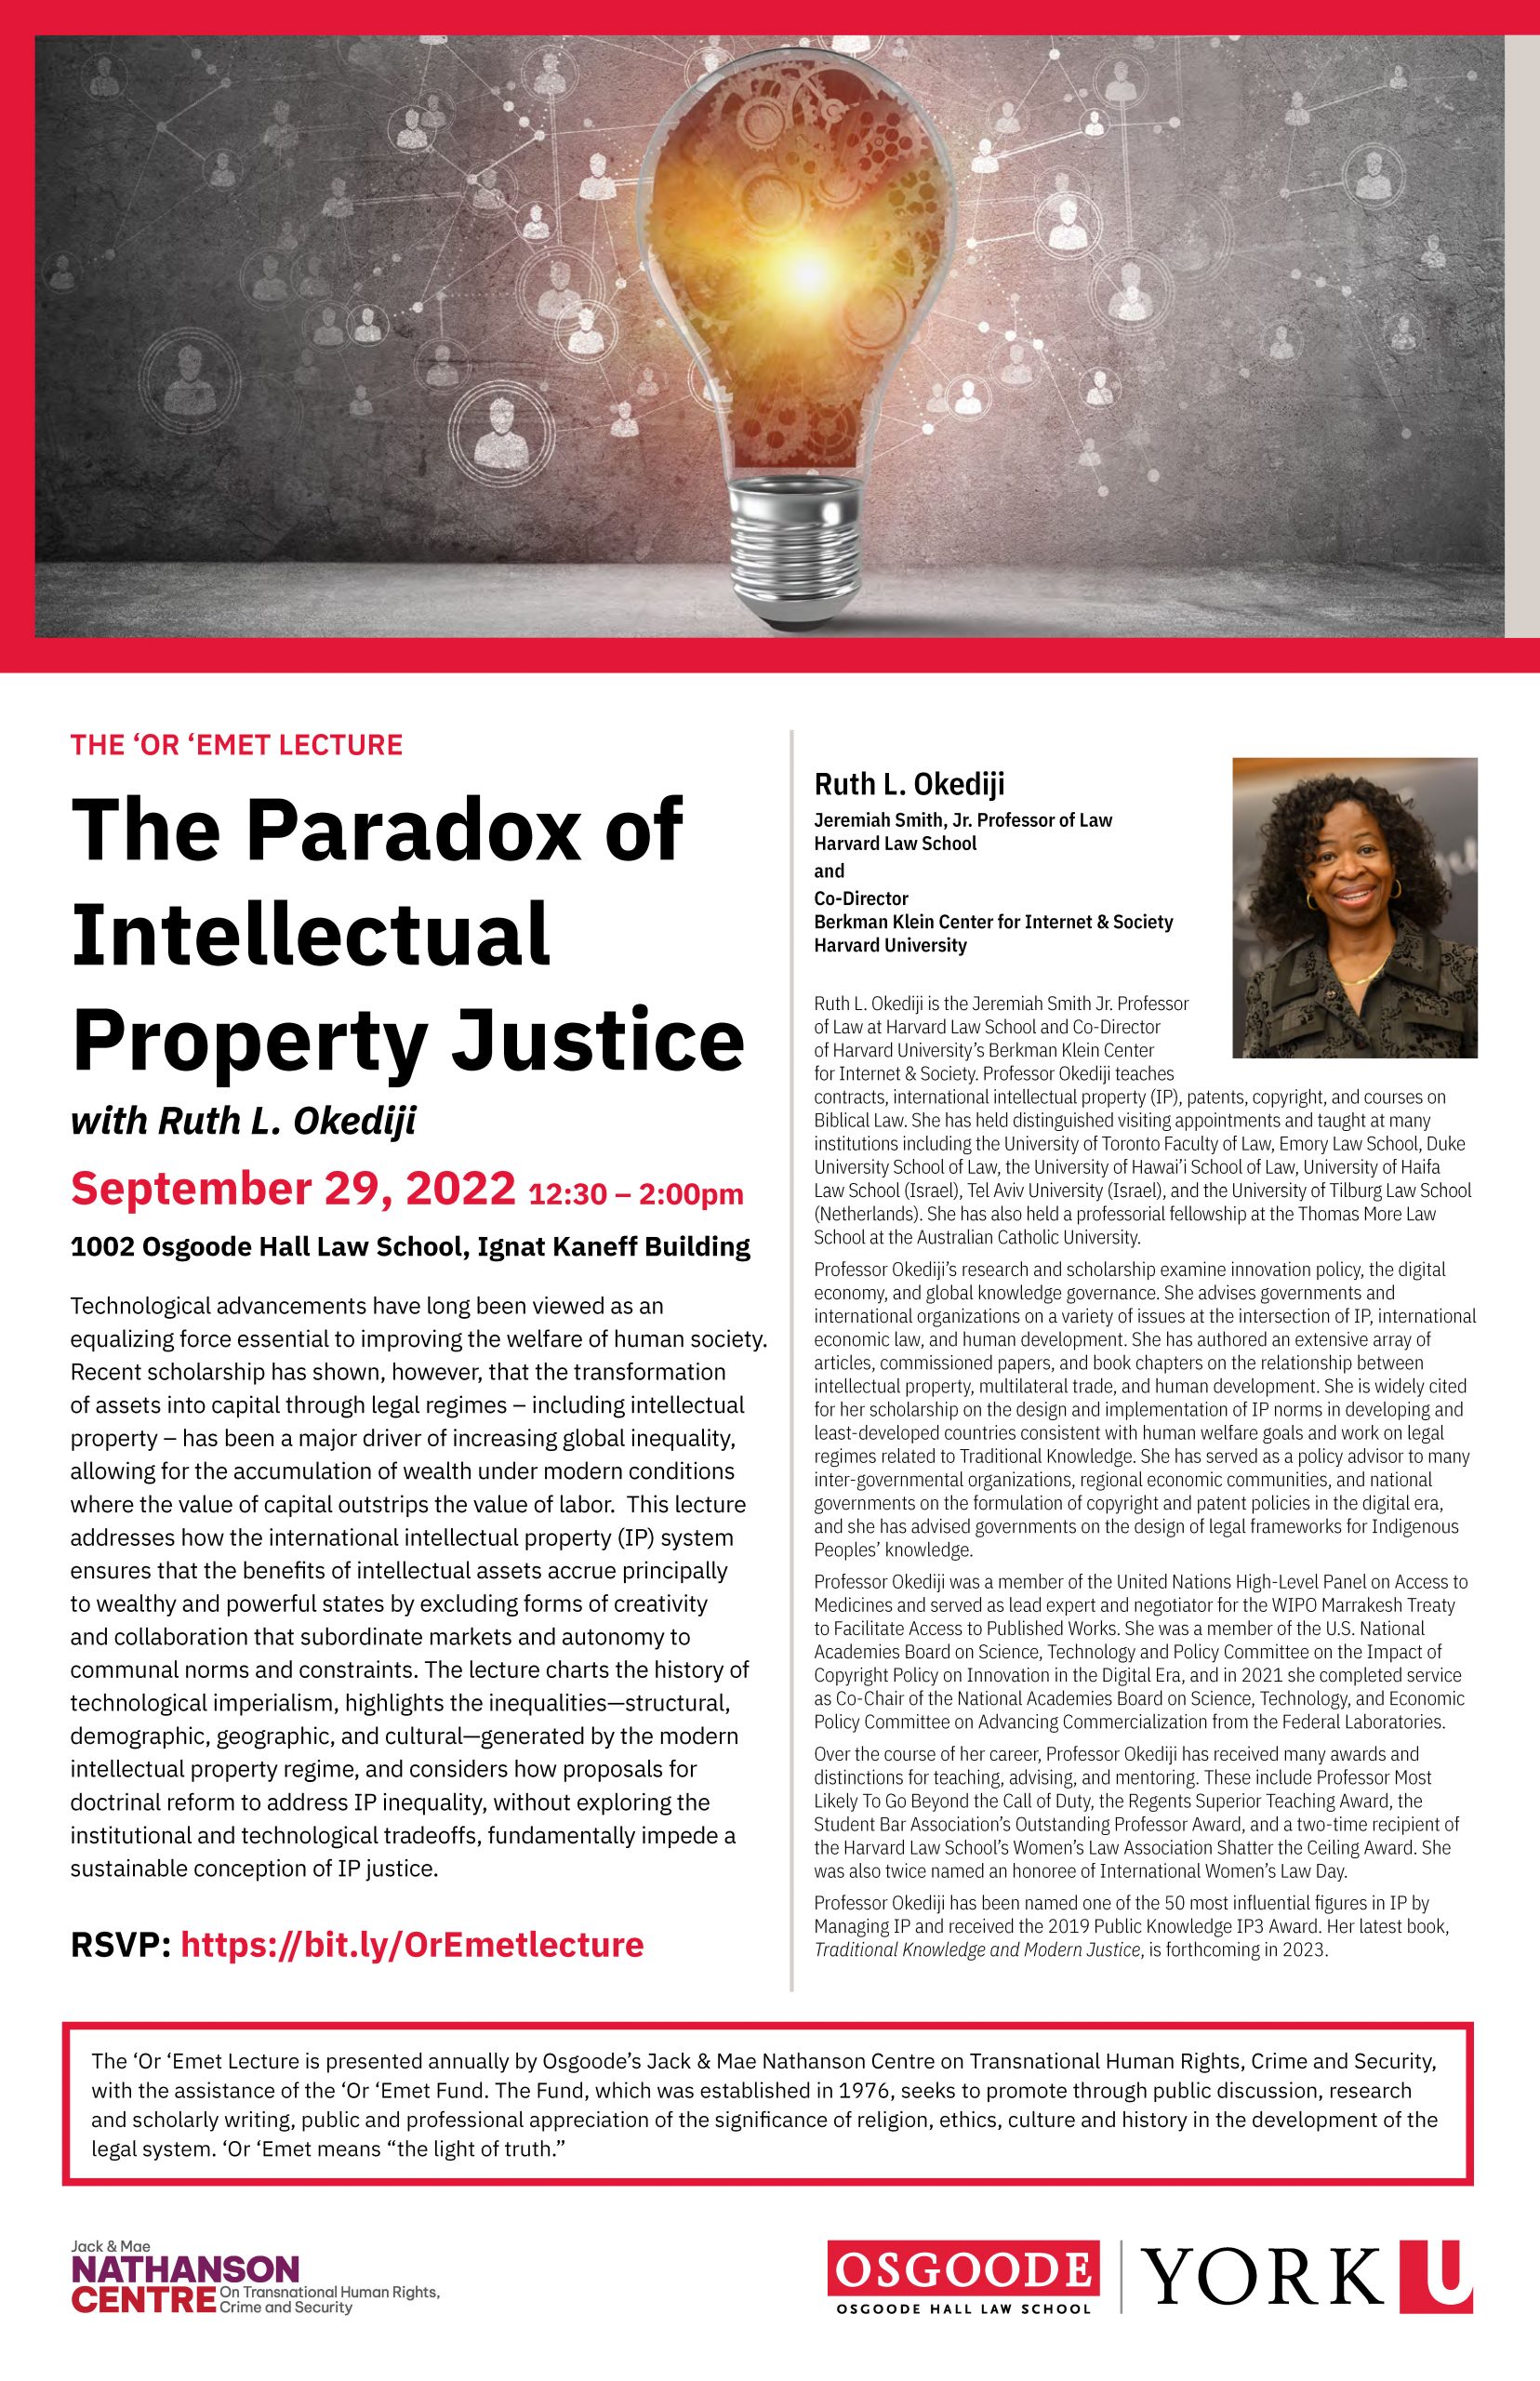 'Or 'Emet Lecture: The Paradox of Intellectual Property Justice